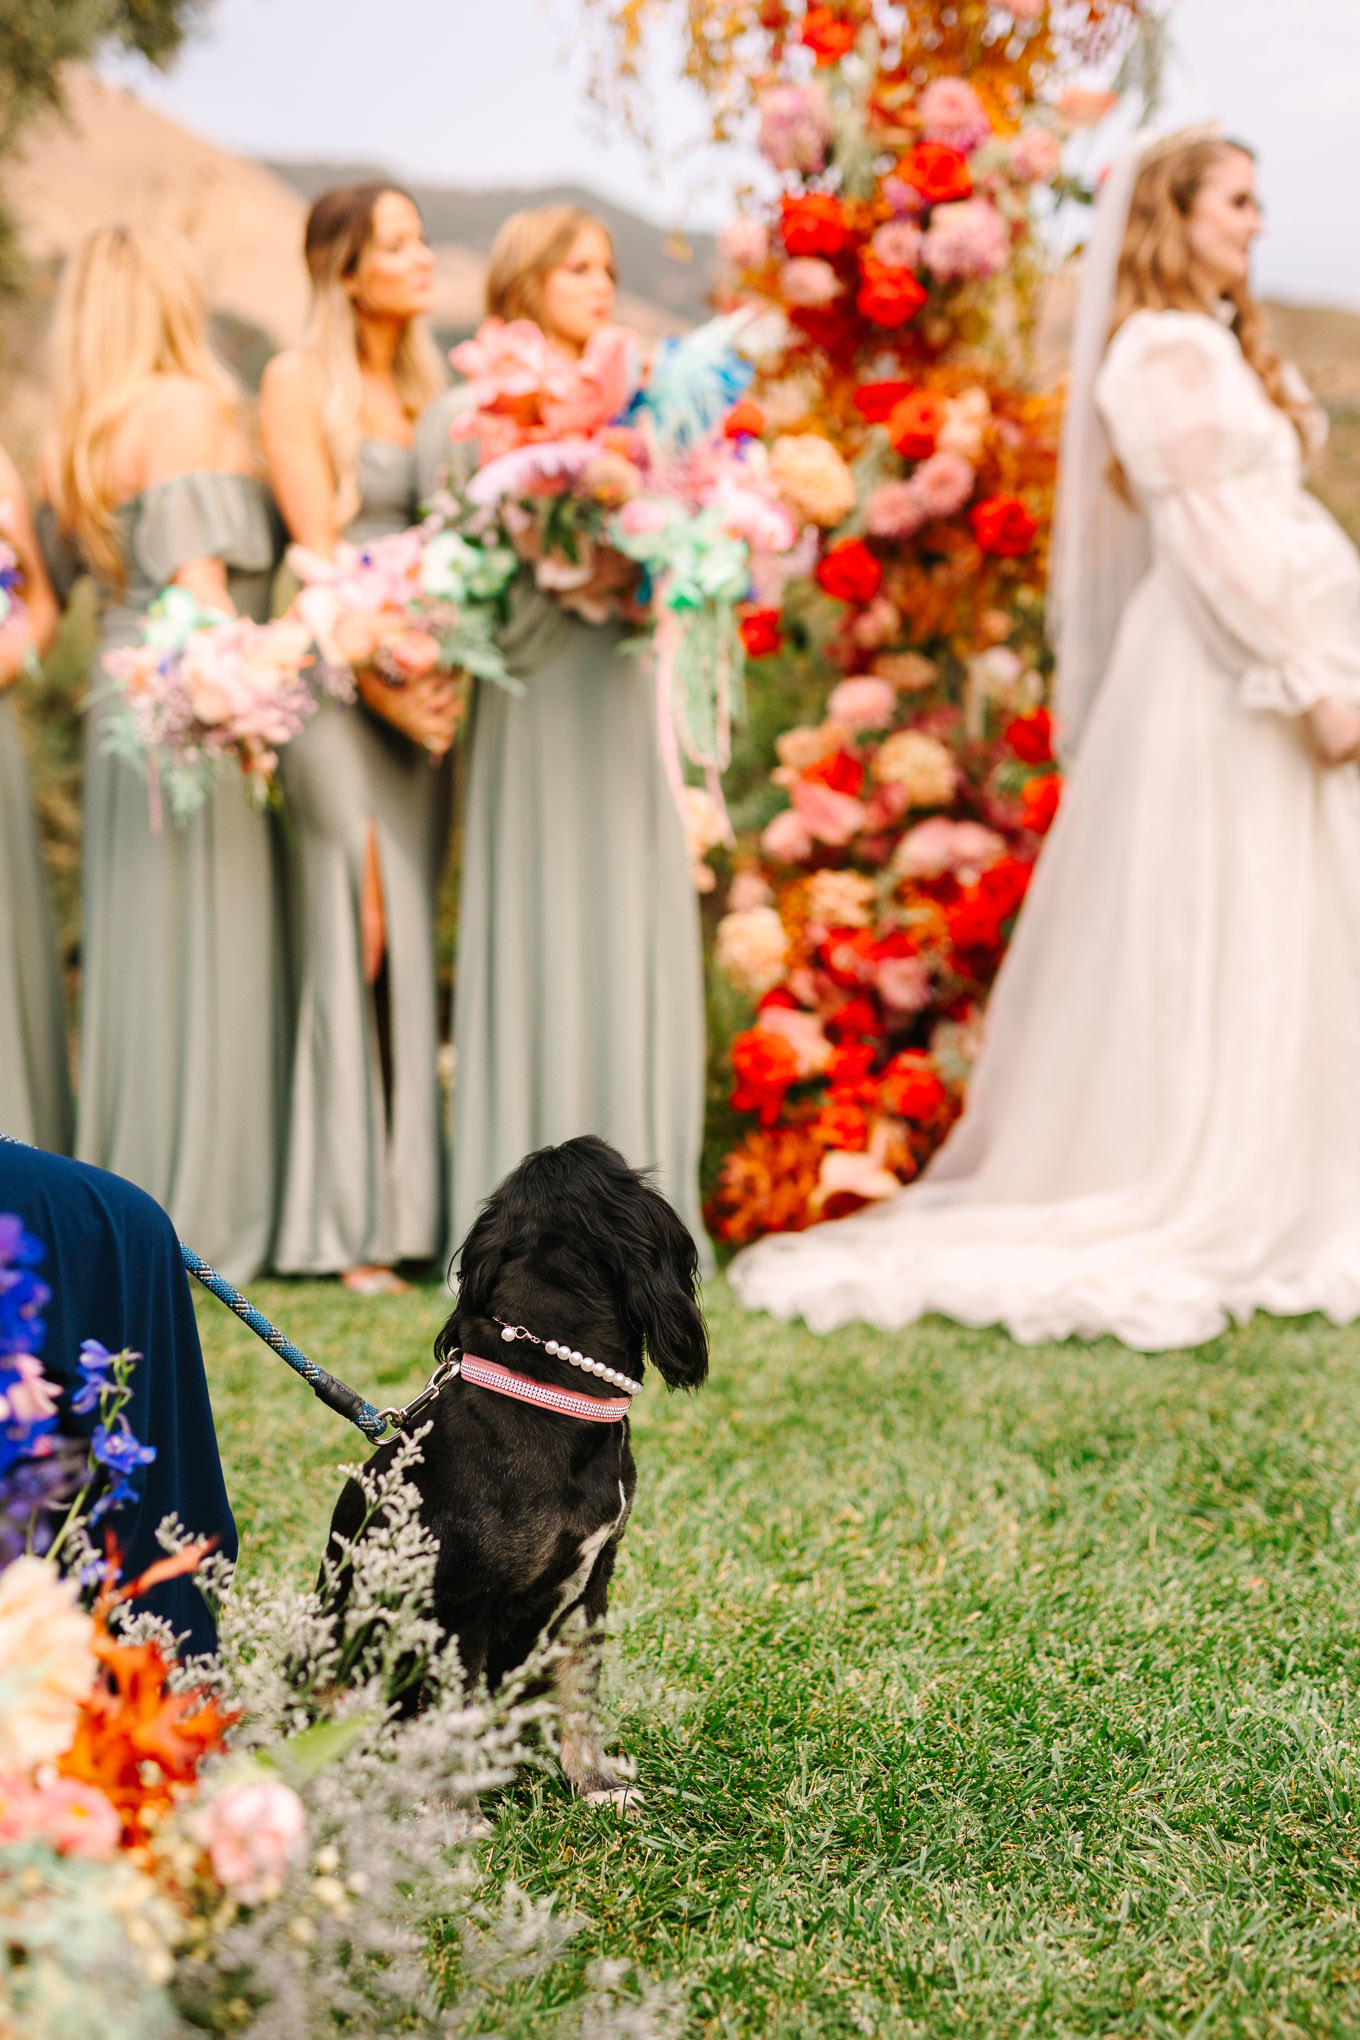 Dog watching her humans get married | Colorful and quirky wedding at Higuera Ranch in San Luis Obispo | #sanluisobispowedding #californiawedding #higueraranch #madonnainn   
Source: Mary Costa Photography | Los Angeles